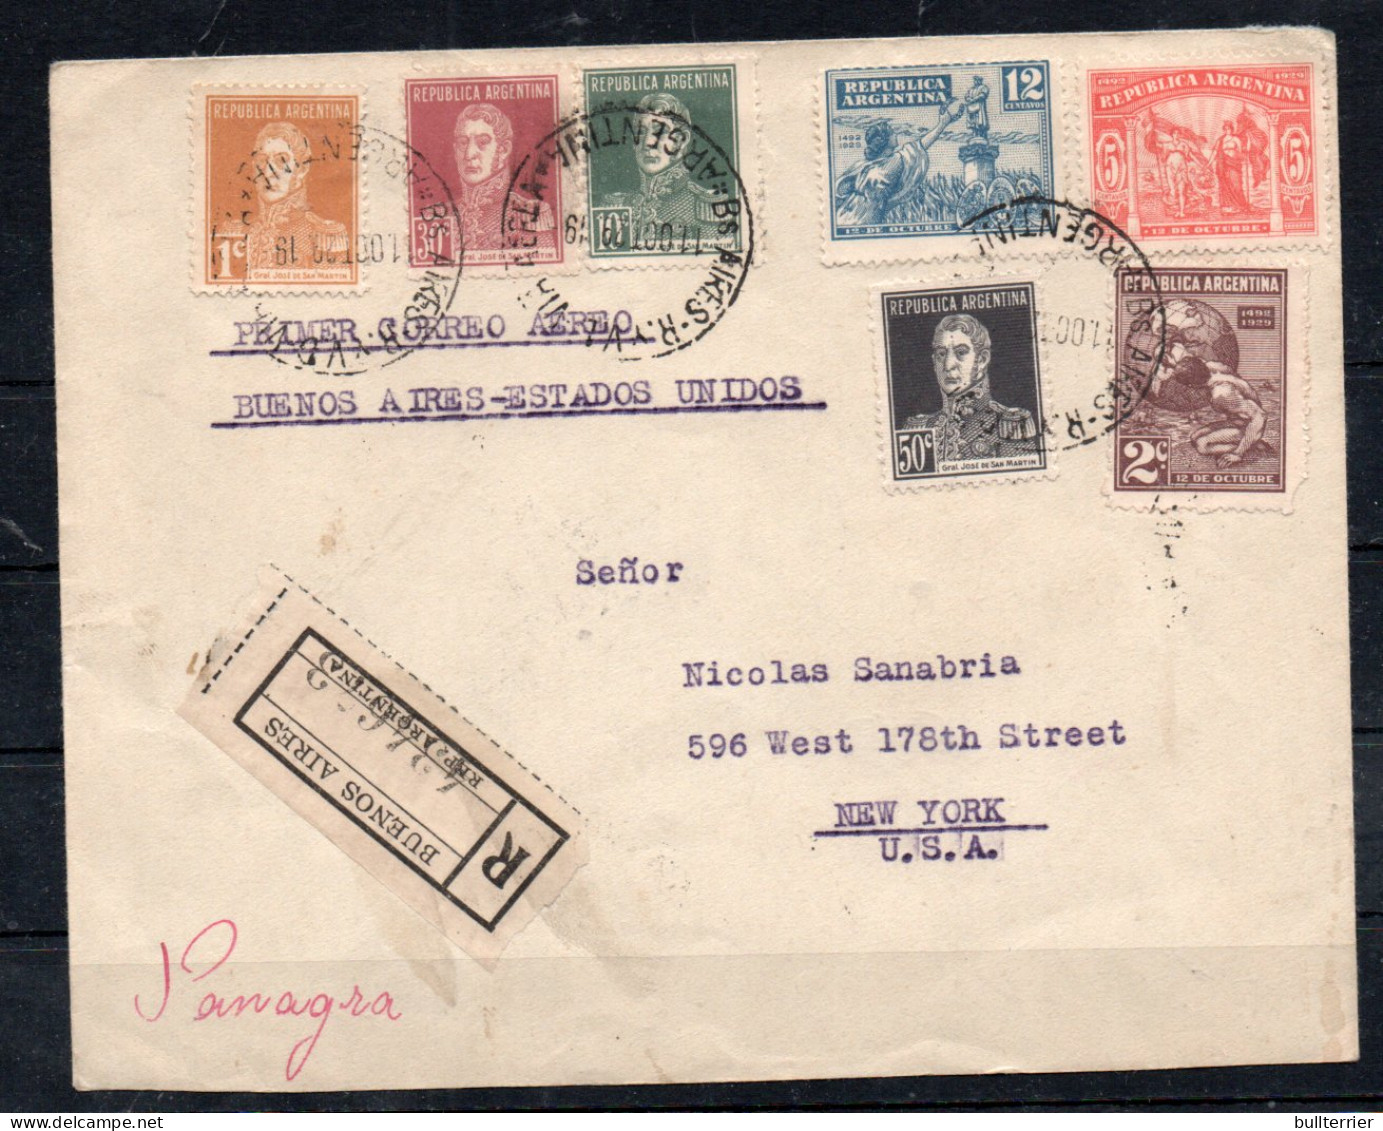 ARGENTINE - 1929  - PANAGRA REGISTERED  AIRMAIL COVER  TO NEW YORK  - Posta Aerea